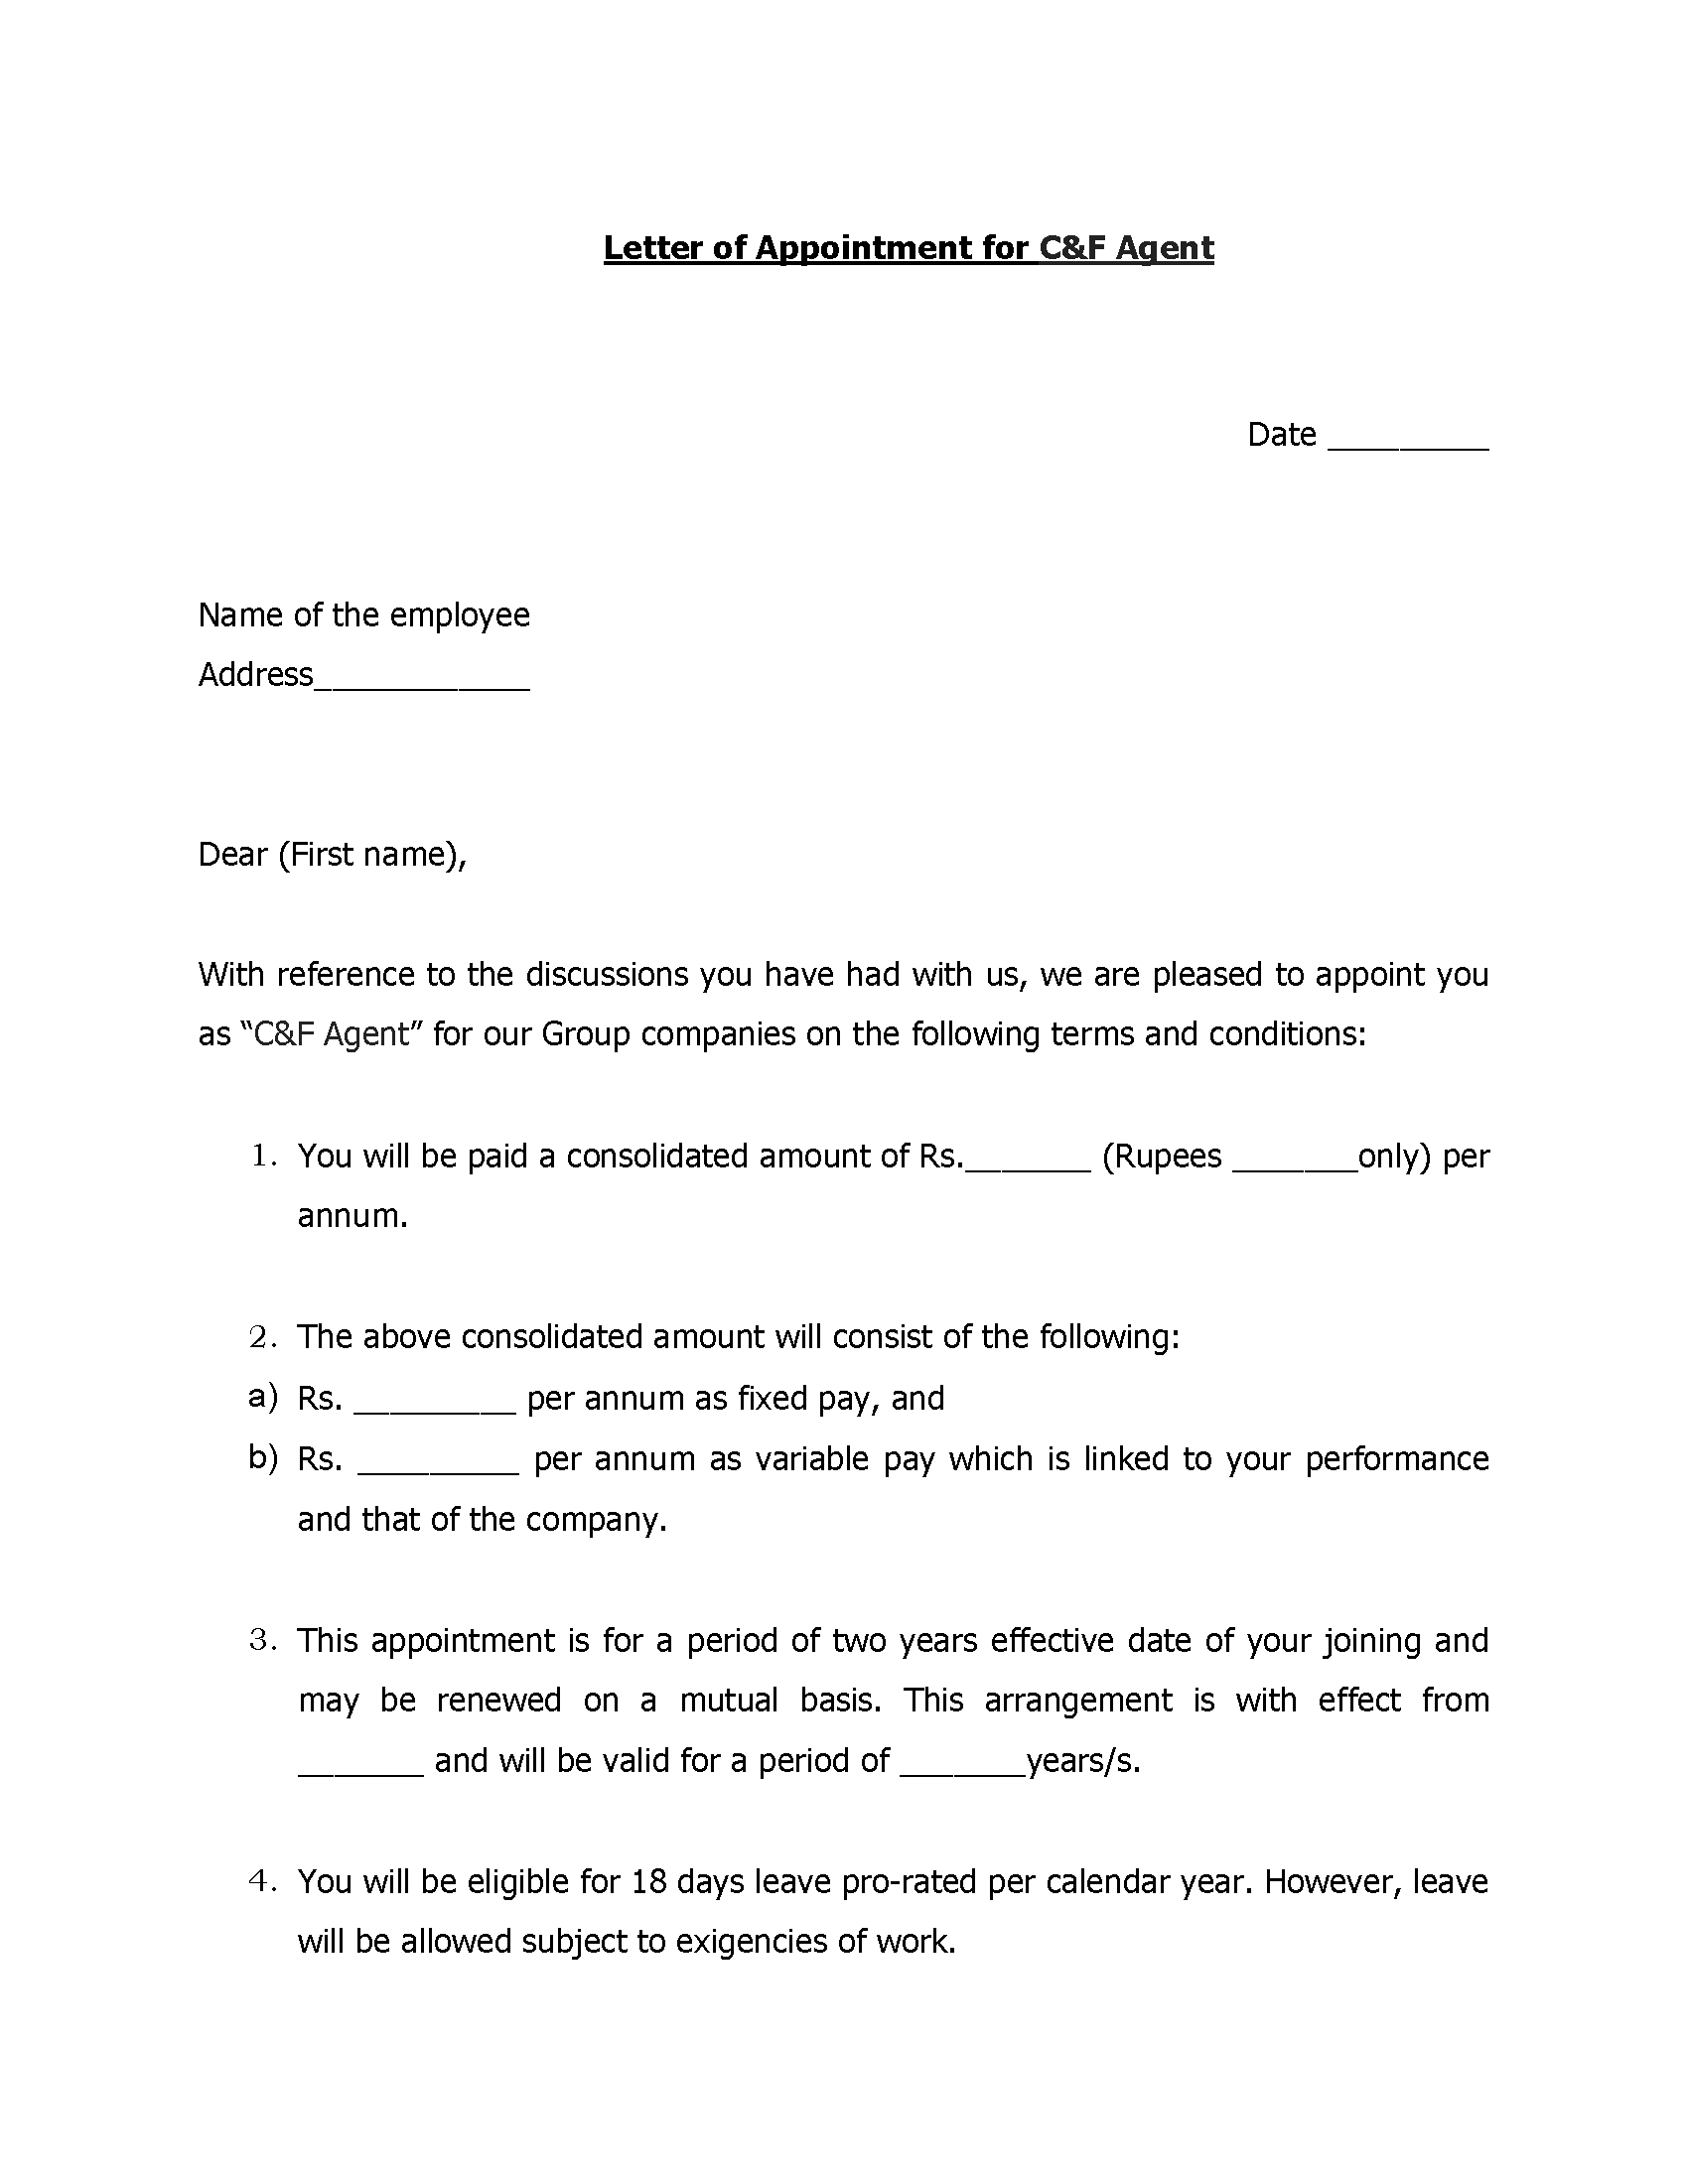 Letter Of Appointment For C&F Agent